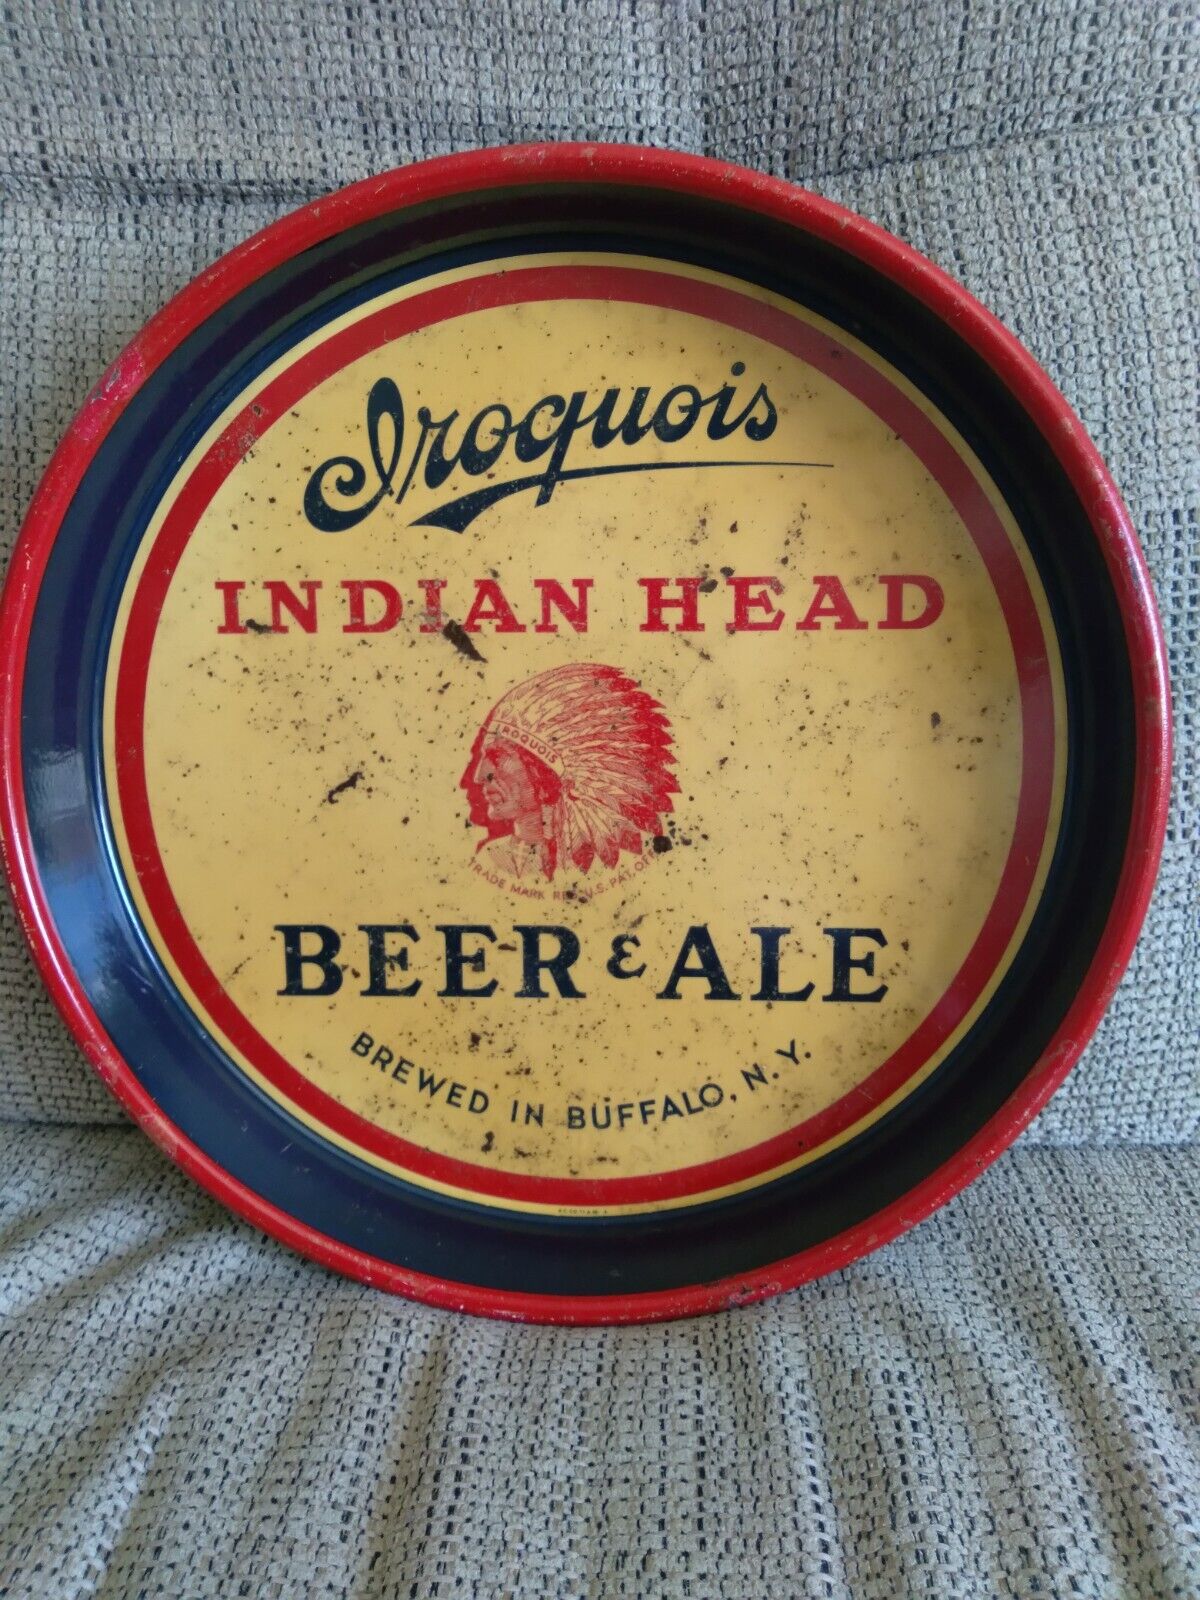 Iroquois Indian Head beer tray in GOOD condition